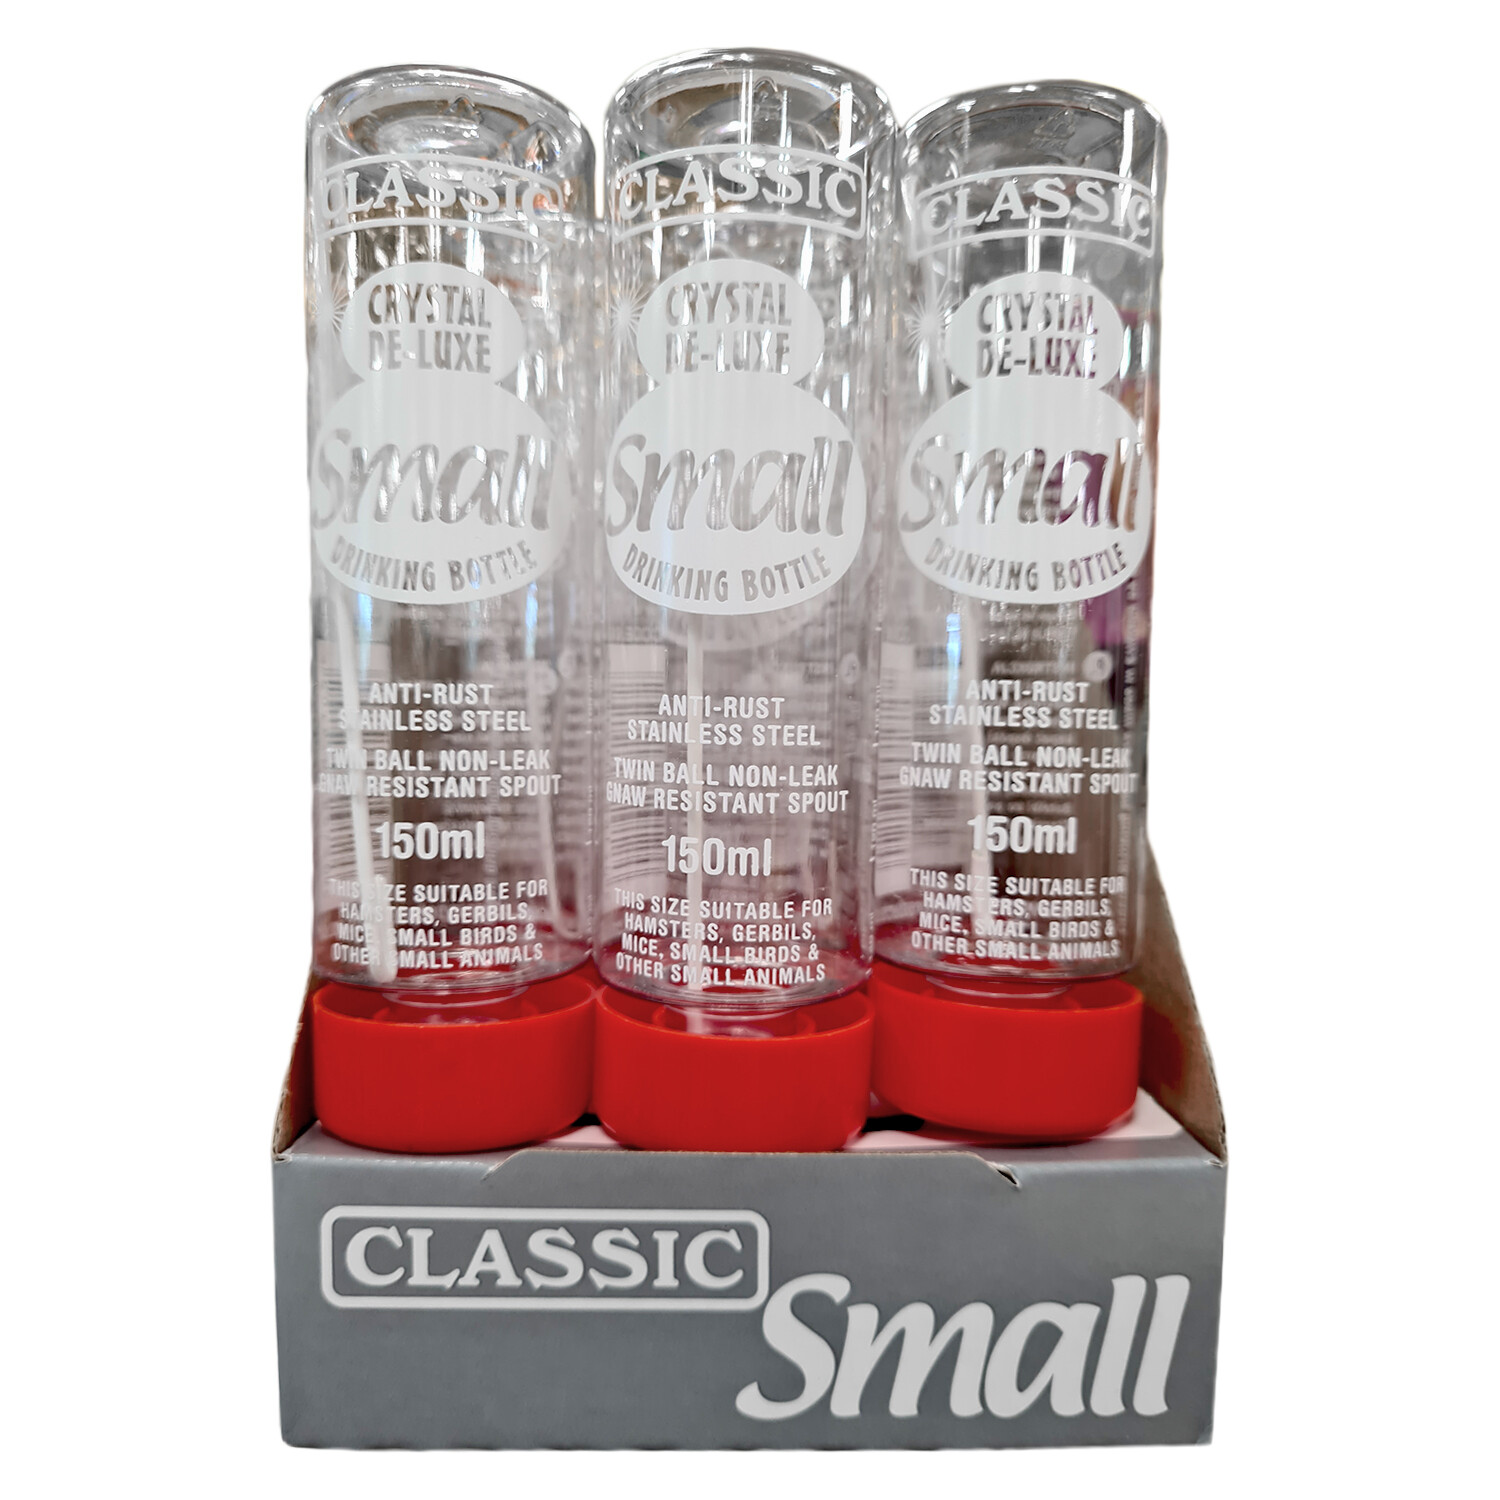 Classic Crystal Deluxe Small Drinking Bottle Image